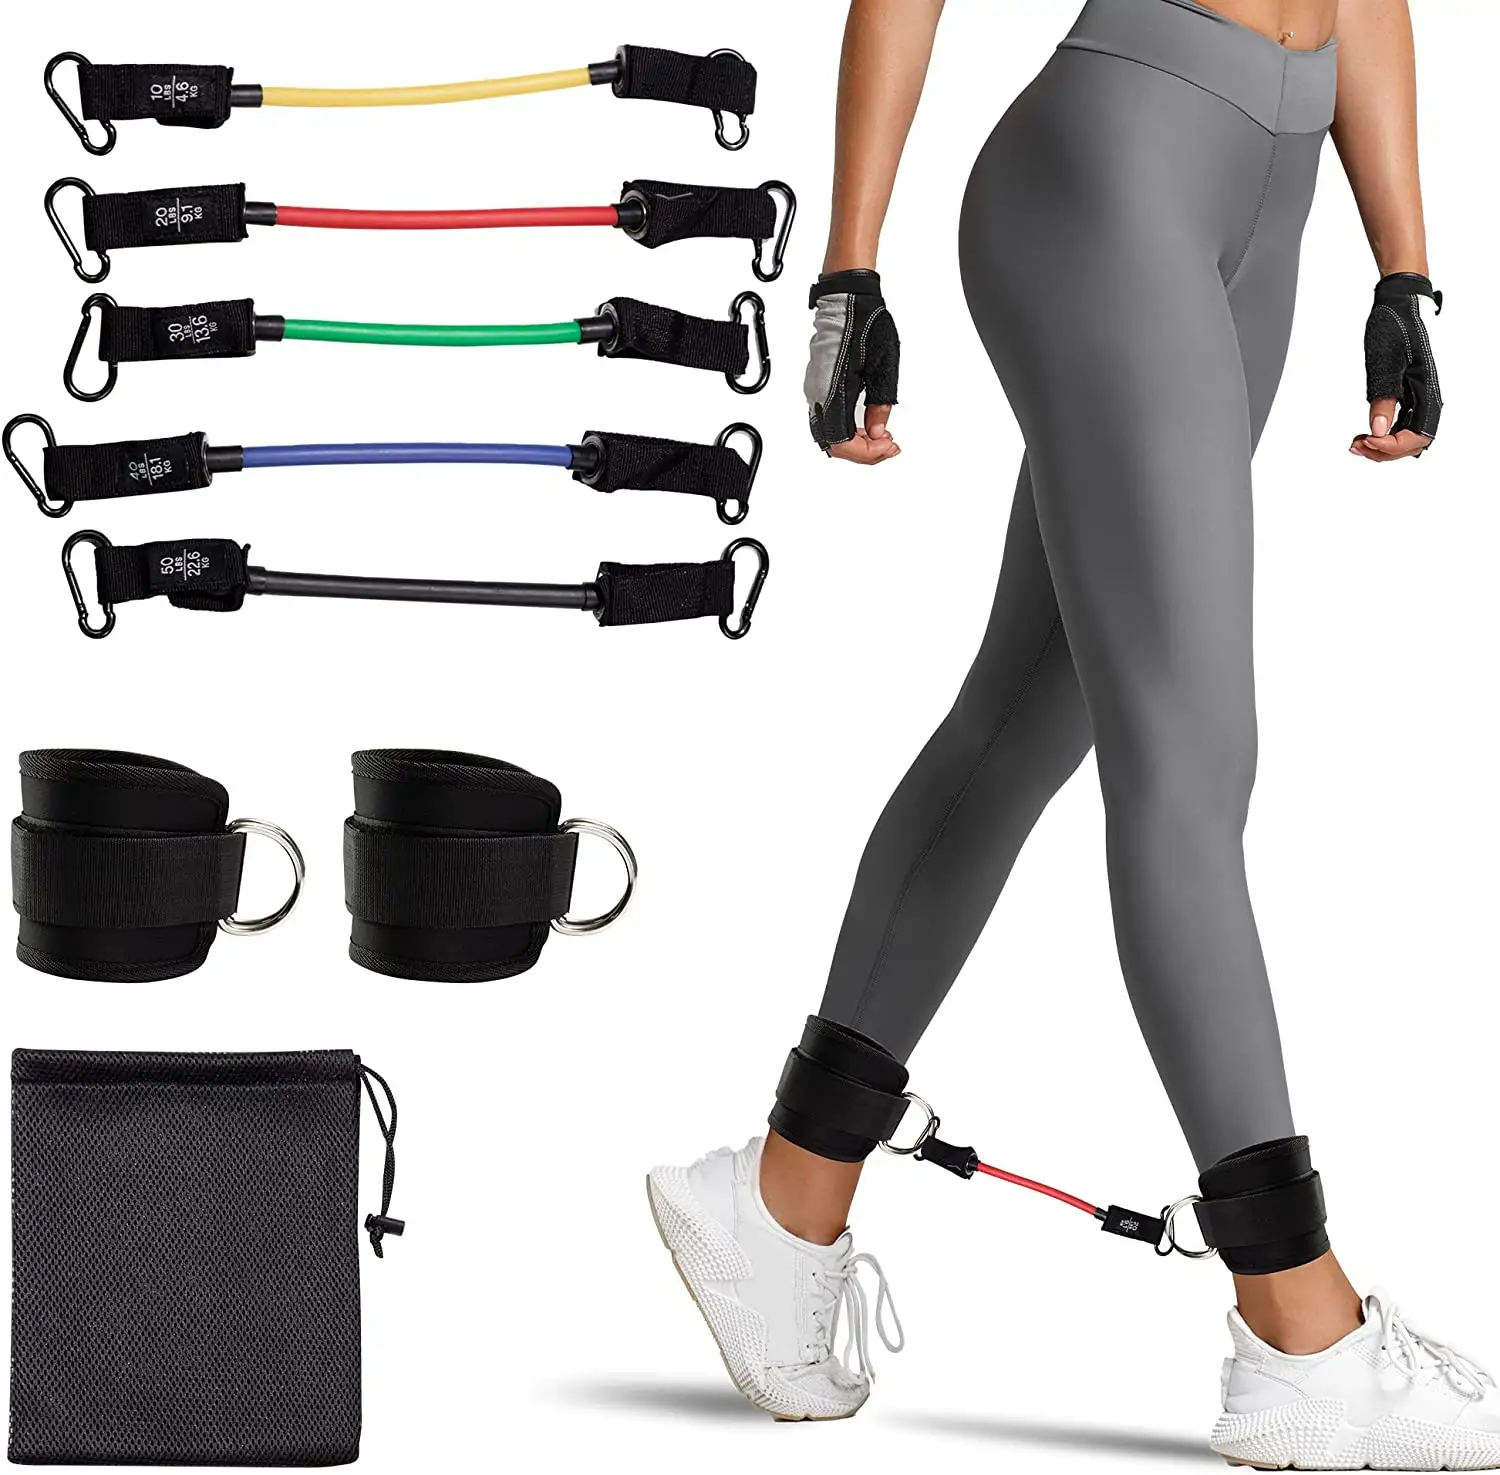 LOW MOQ Ankle Strap Resistance Tube Bands With Cuffs Set For General Fitness with Leg And Athlete Speed Training